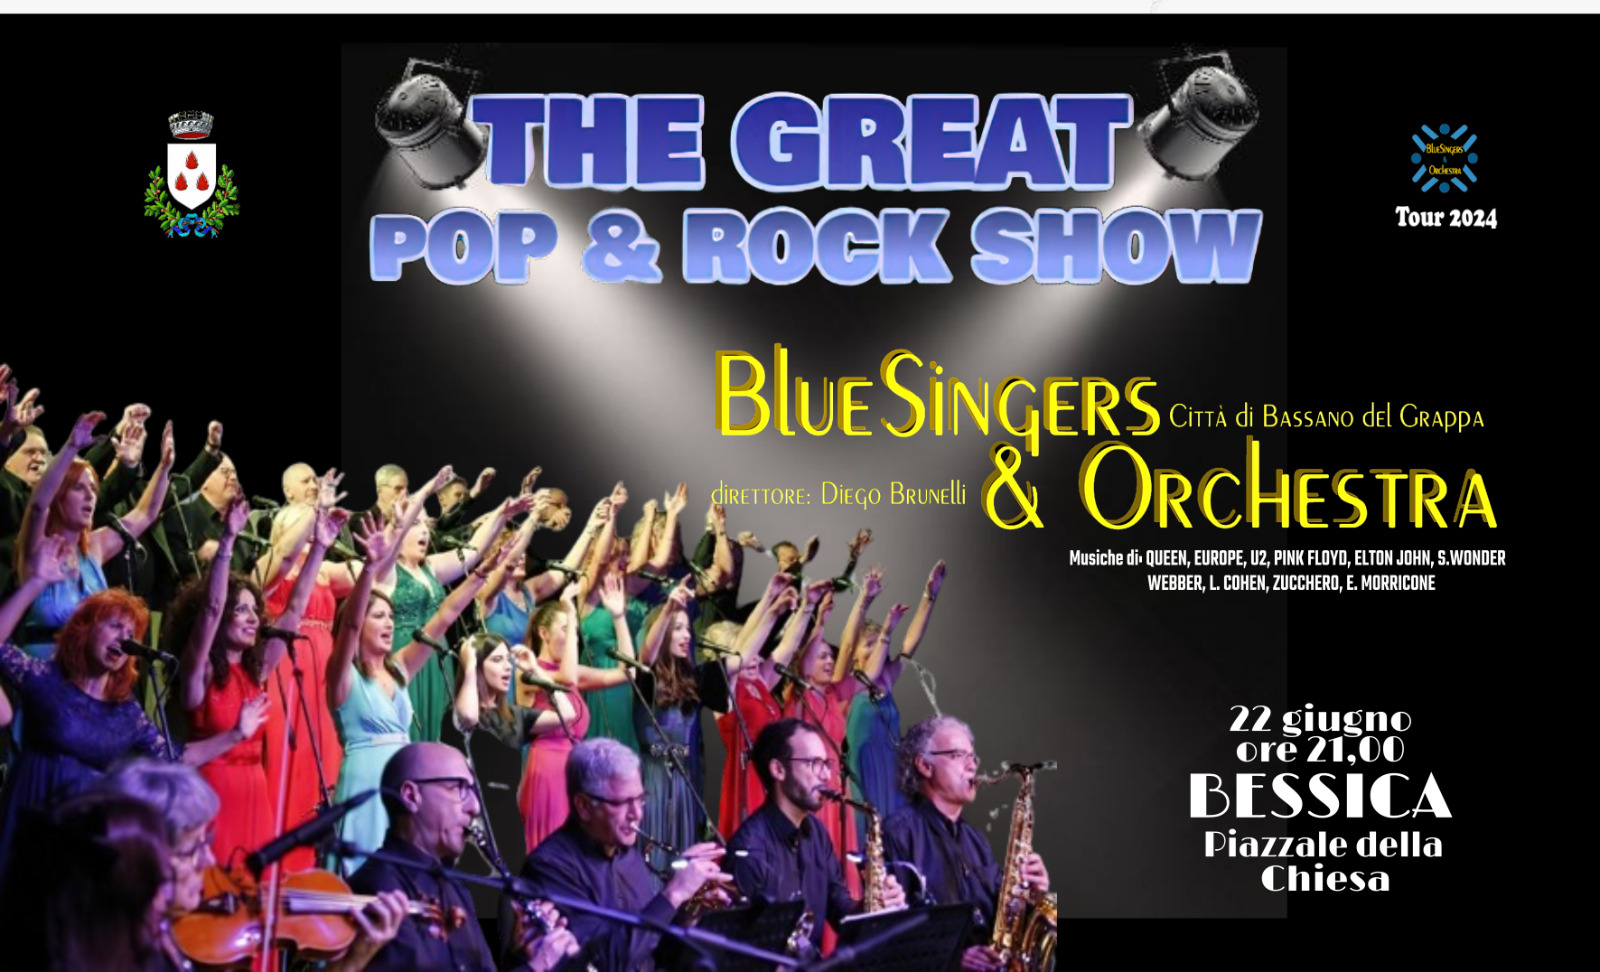 THE GREAT POP & ROCK SHOW